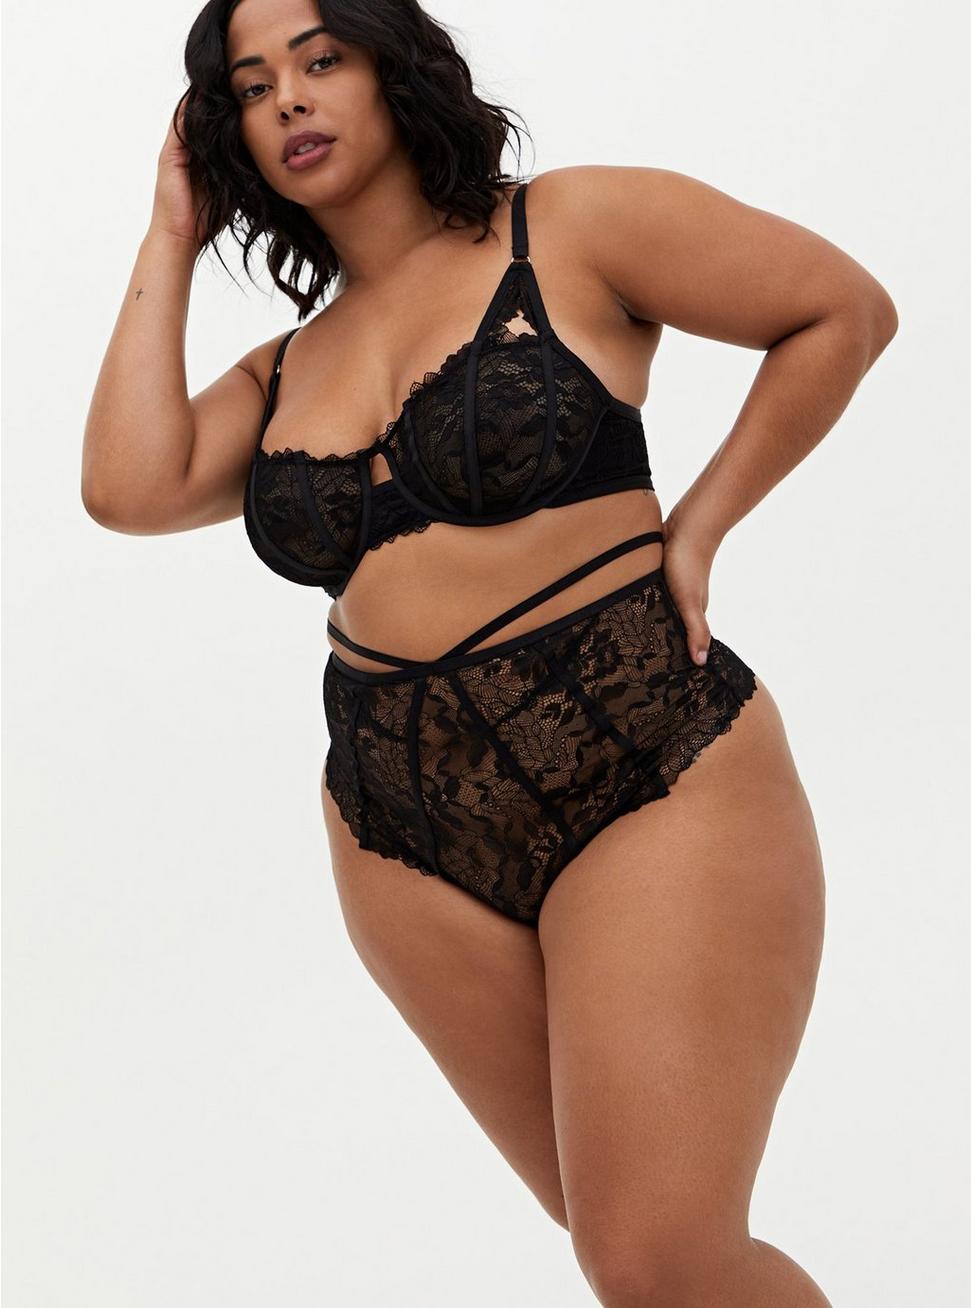 Plus Size - Black Lace Strappy Open Back High Waist Thong Panty - Torrid